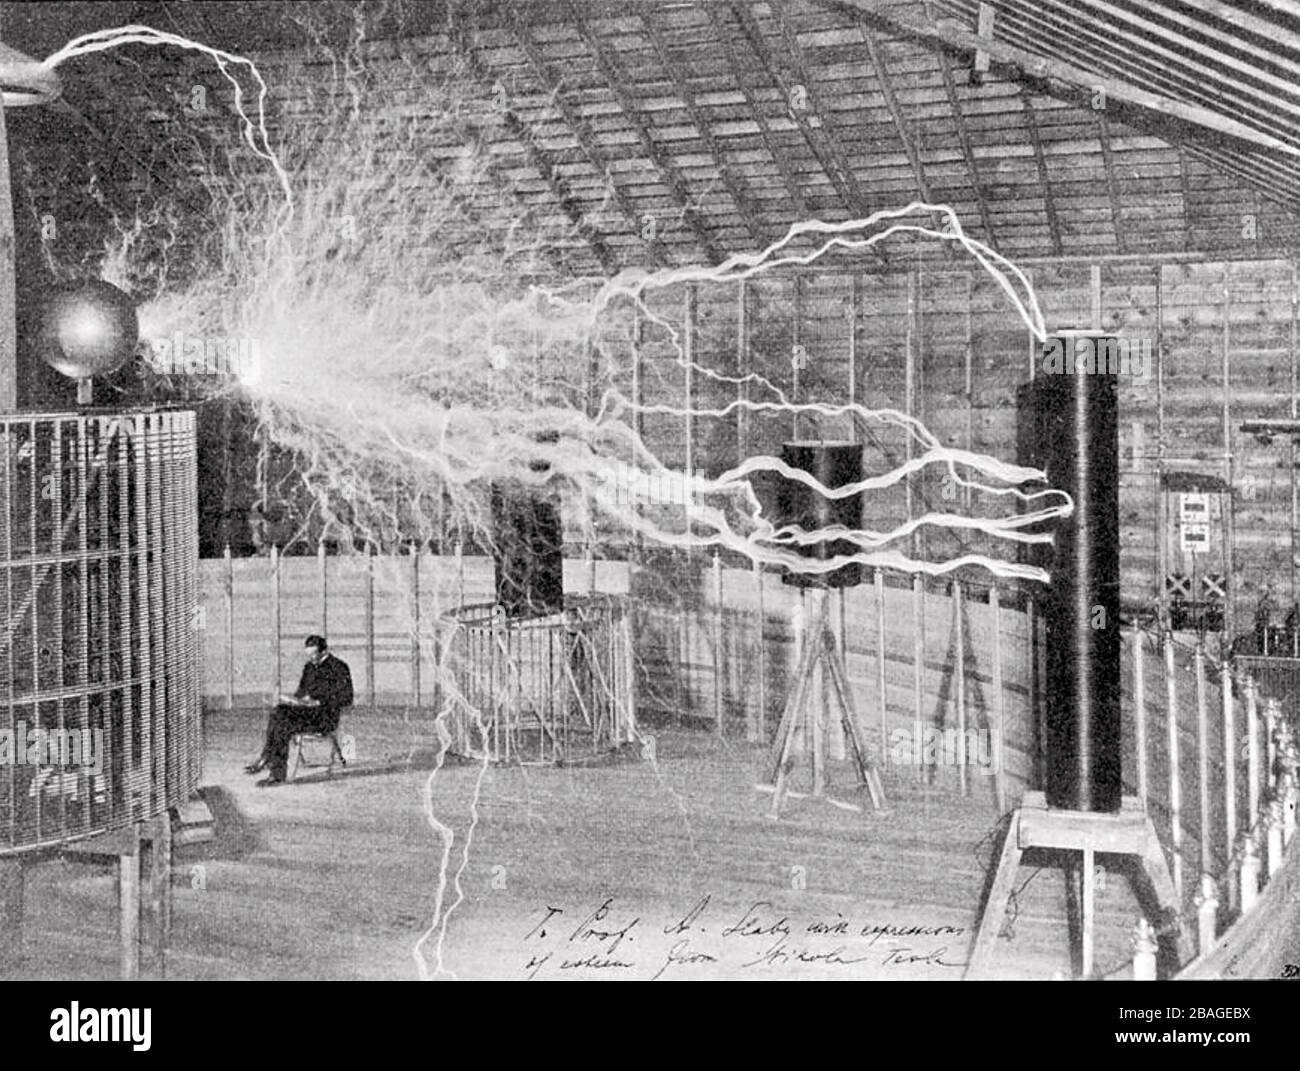 NIKOLA TESLA (1856-1943) Serbian-American inventor and electrical engineer in his laboratory in Colorado Springs about 1899. The image is a double exposure. Photographer Dickenson Alley first recorded the millions of volts created by Tesla's 'magnifying transmitter' then exposed the same plate with Tesla seated. Stock Photo